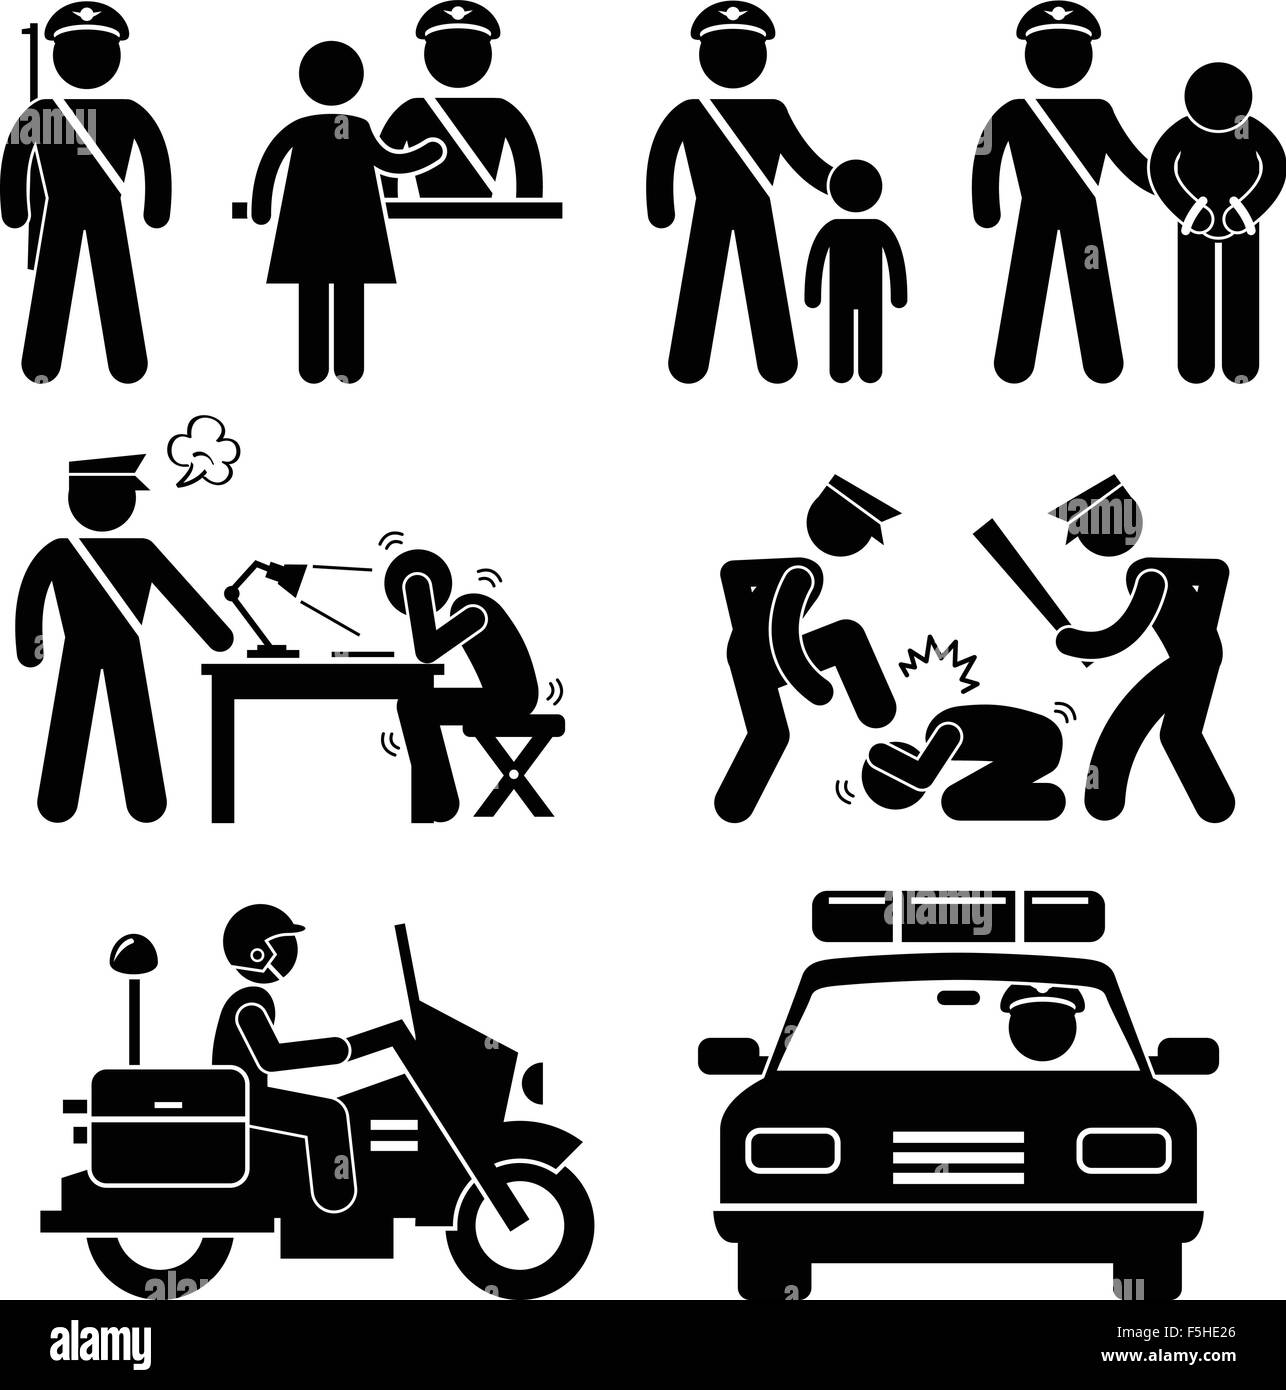 Police Station Policeman Motorcycle Car Report Interrogation Stick Figure Pictogram Icon Stock Vector